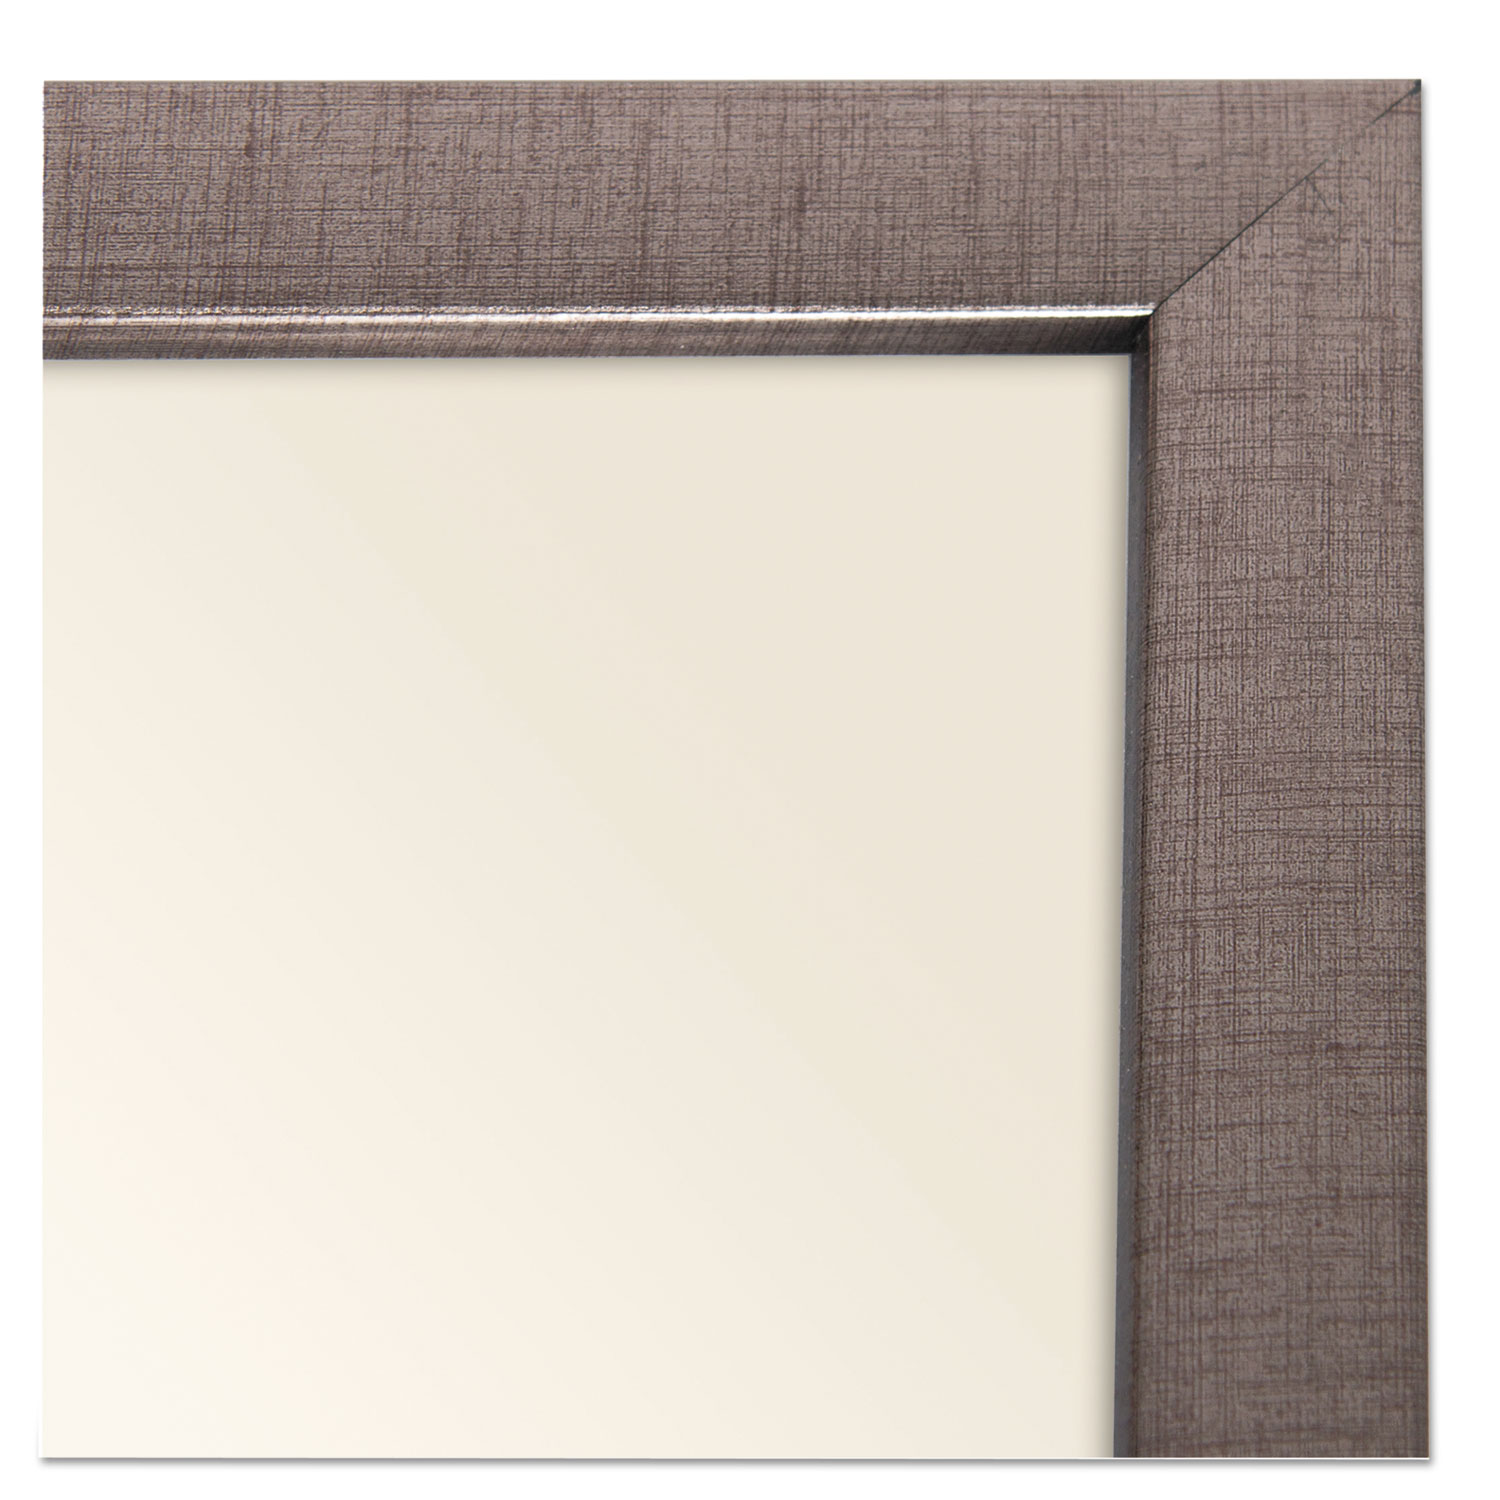 Textured Gallery Document Frame, Pewter, 8 1/2 x 11